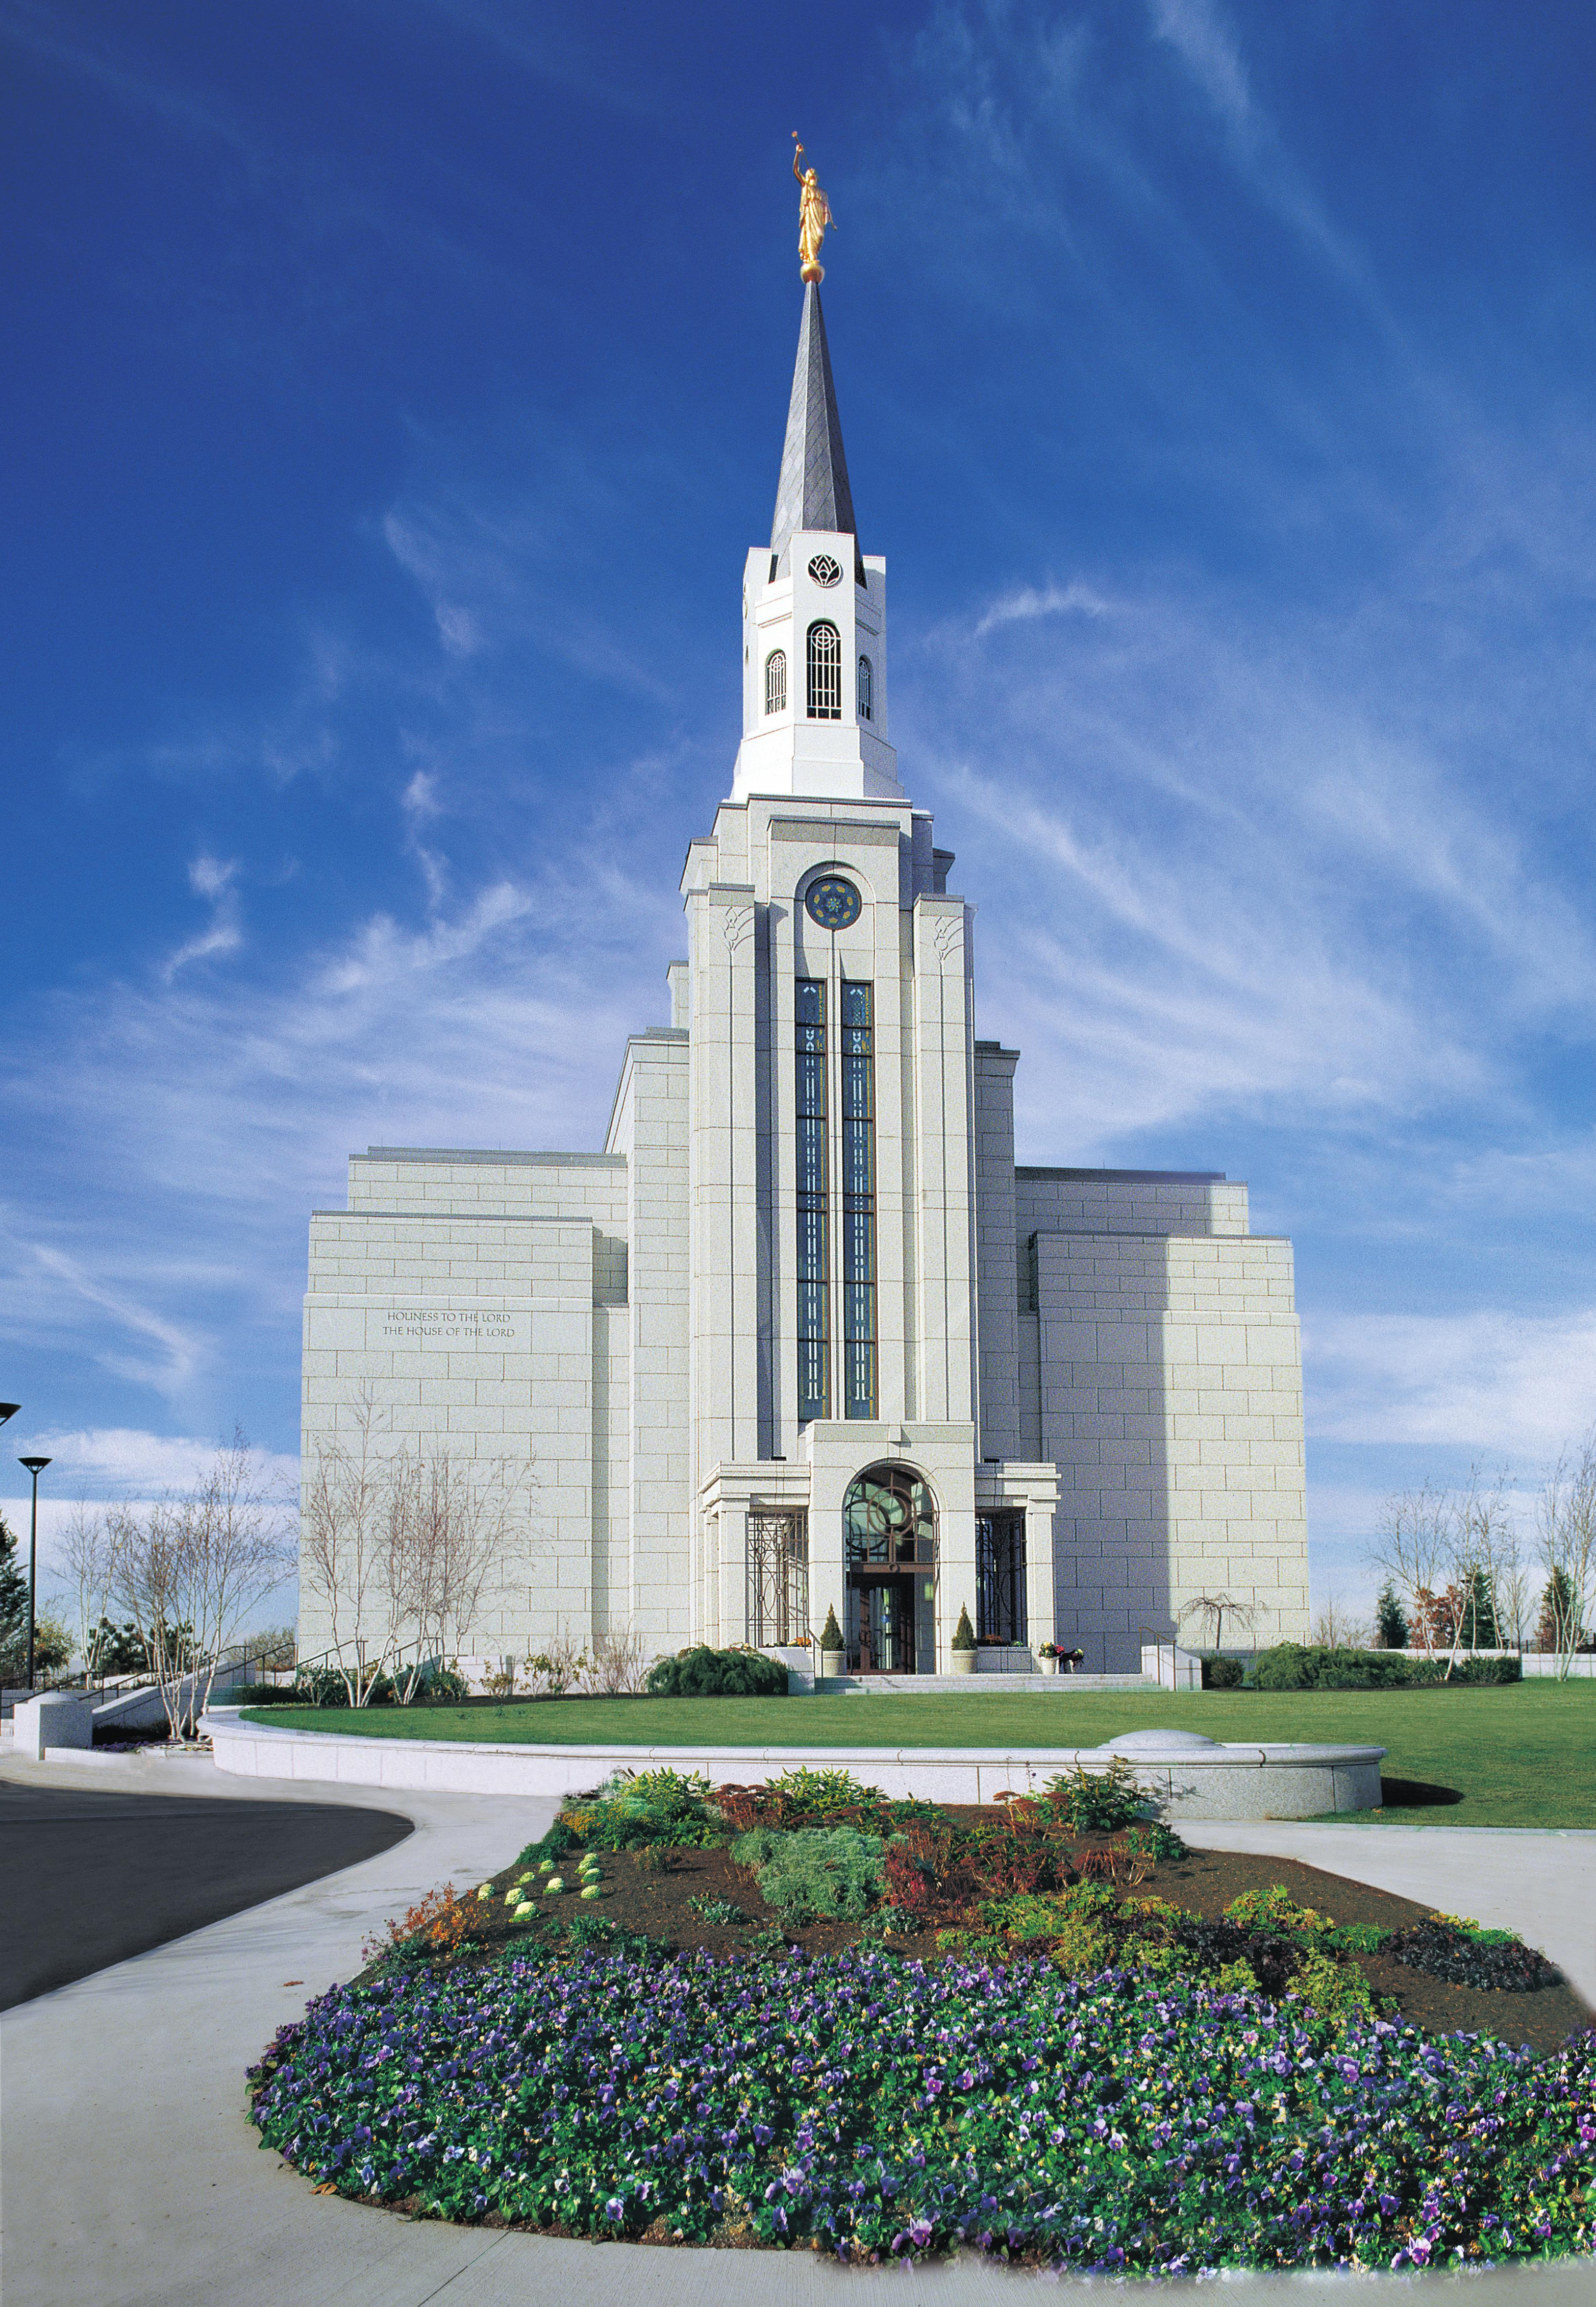 The Church of Jesus Christ of Latter-Day Saints | 6400 Park Ave, Lake Isabella, CA, 93240 | +1 (760) 379-2904